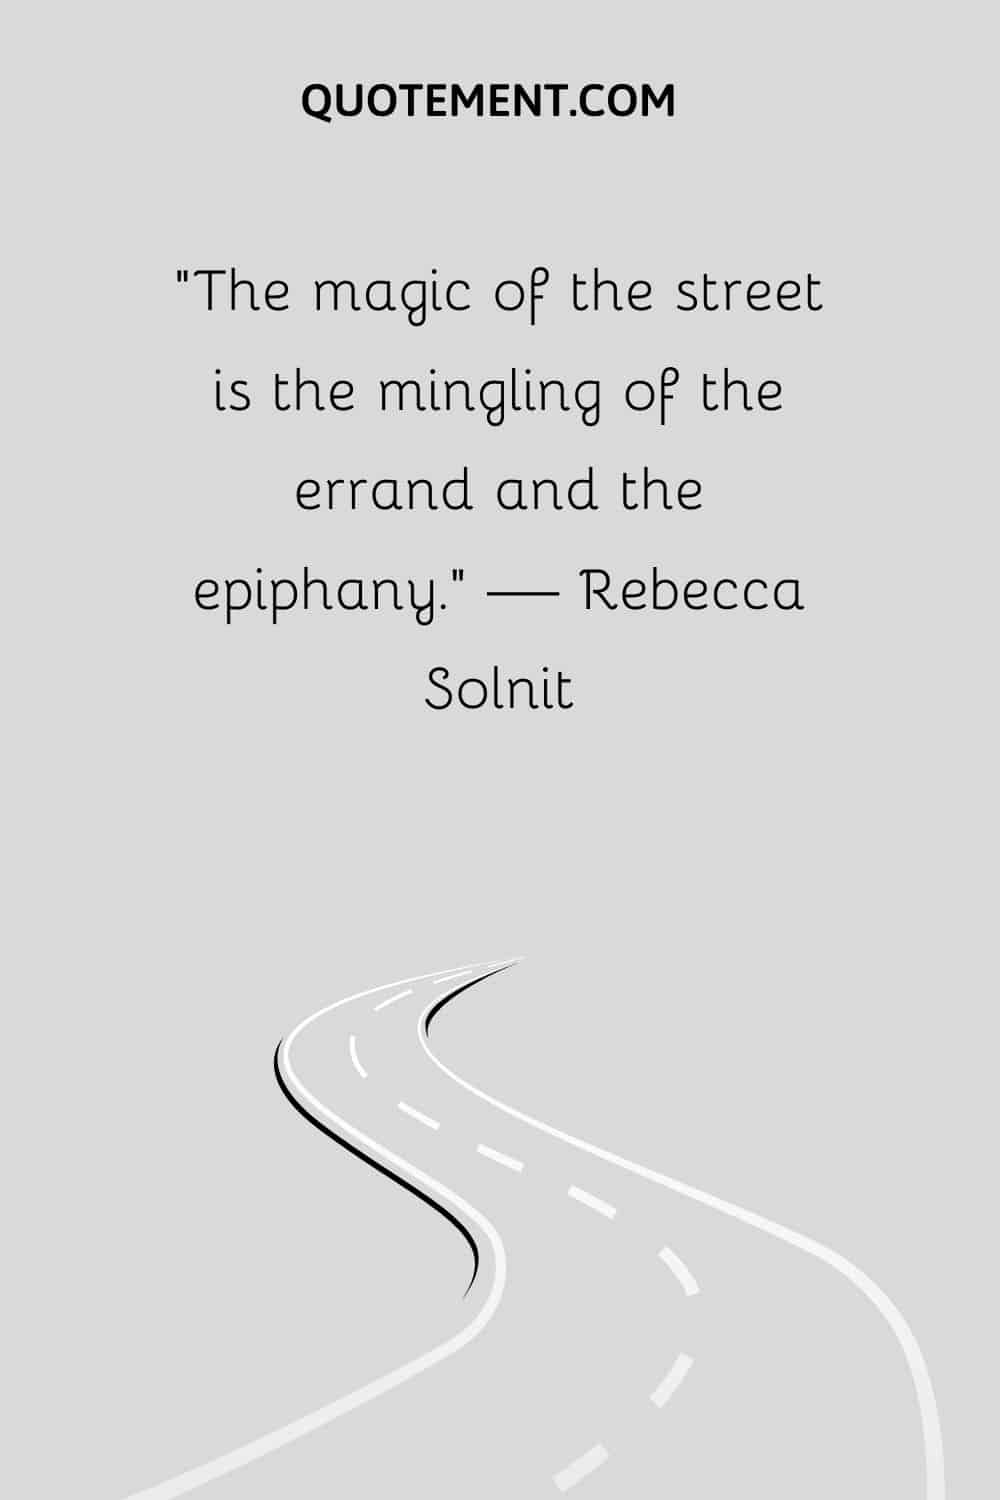 The magic of the street is the mingling of the errand and the epiphany